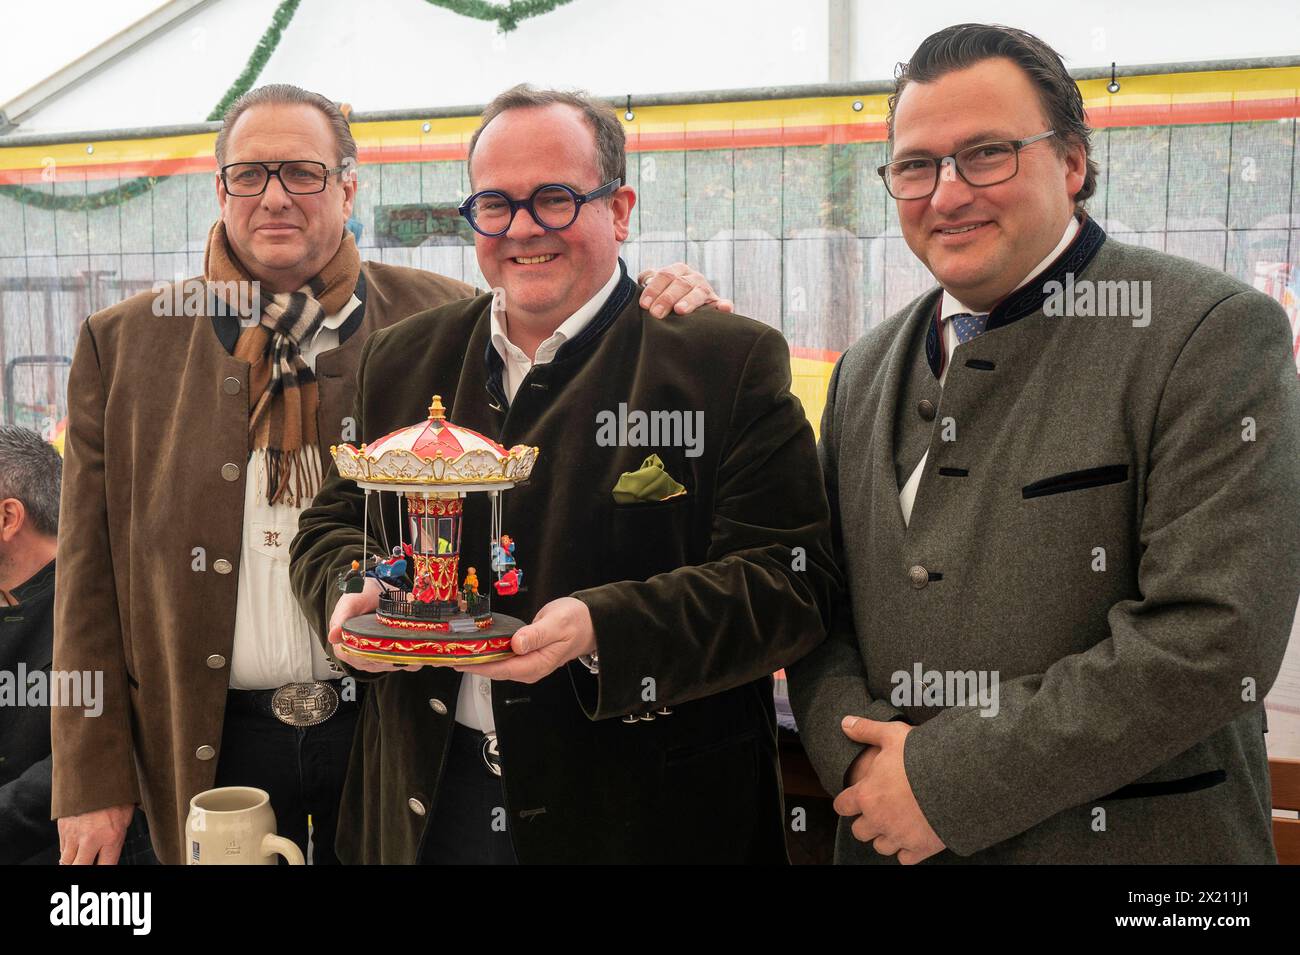 Muenchen, Pressekonferenz zum 58. Fruehlingsfest auf der Theresienwiese, v. l. Robby Eckl, Clemens Baumgaertner, Peter Bausch *** Munich, press conference on the 58th Spring Festival on the Theresienwiese, from left Robby Eckl, Clemens Baumgaertner, Peter Bausch Stock Photo